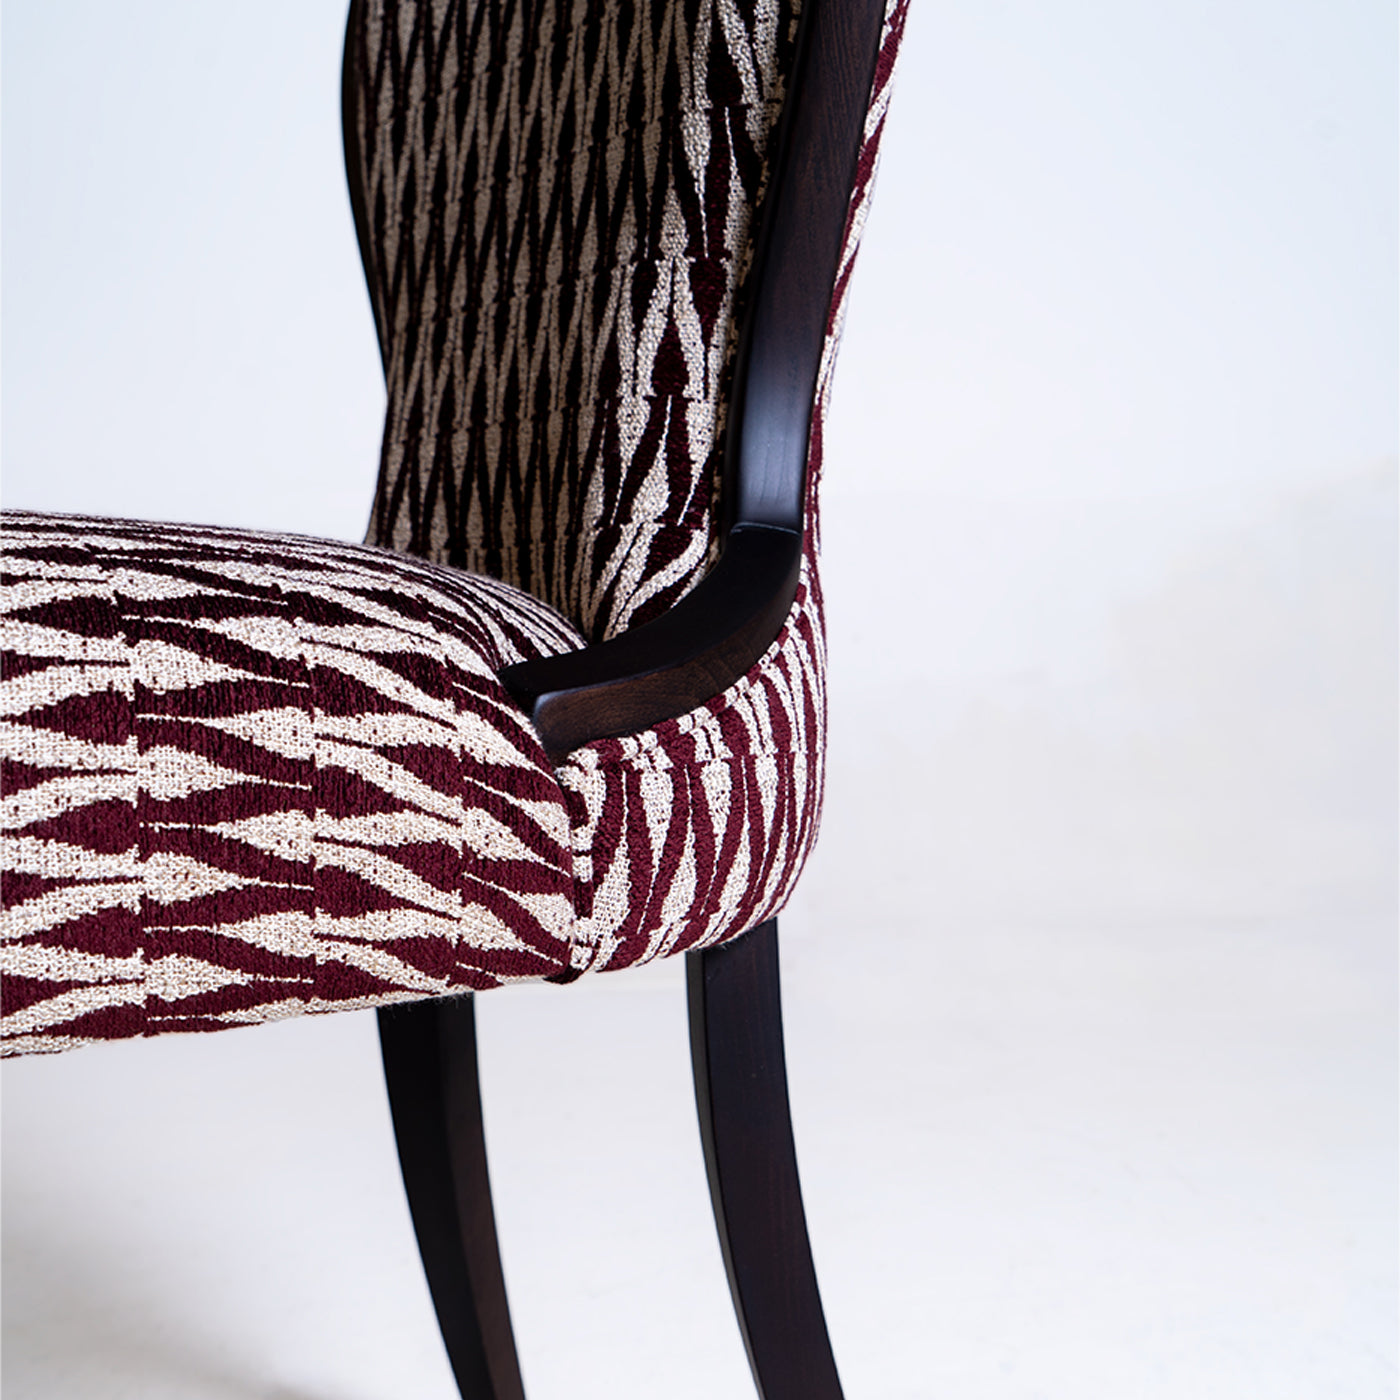 Gong Patterned Chair  - Alternative view 1